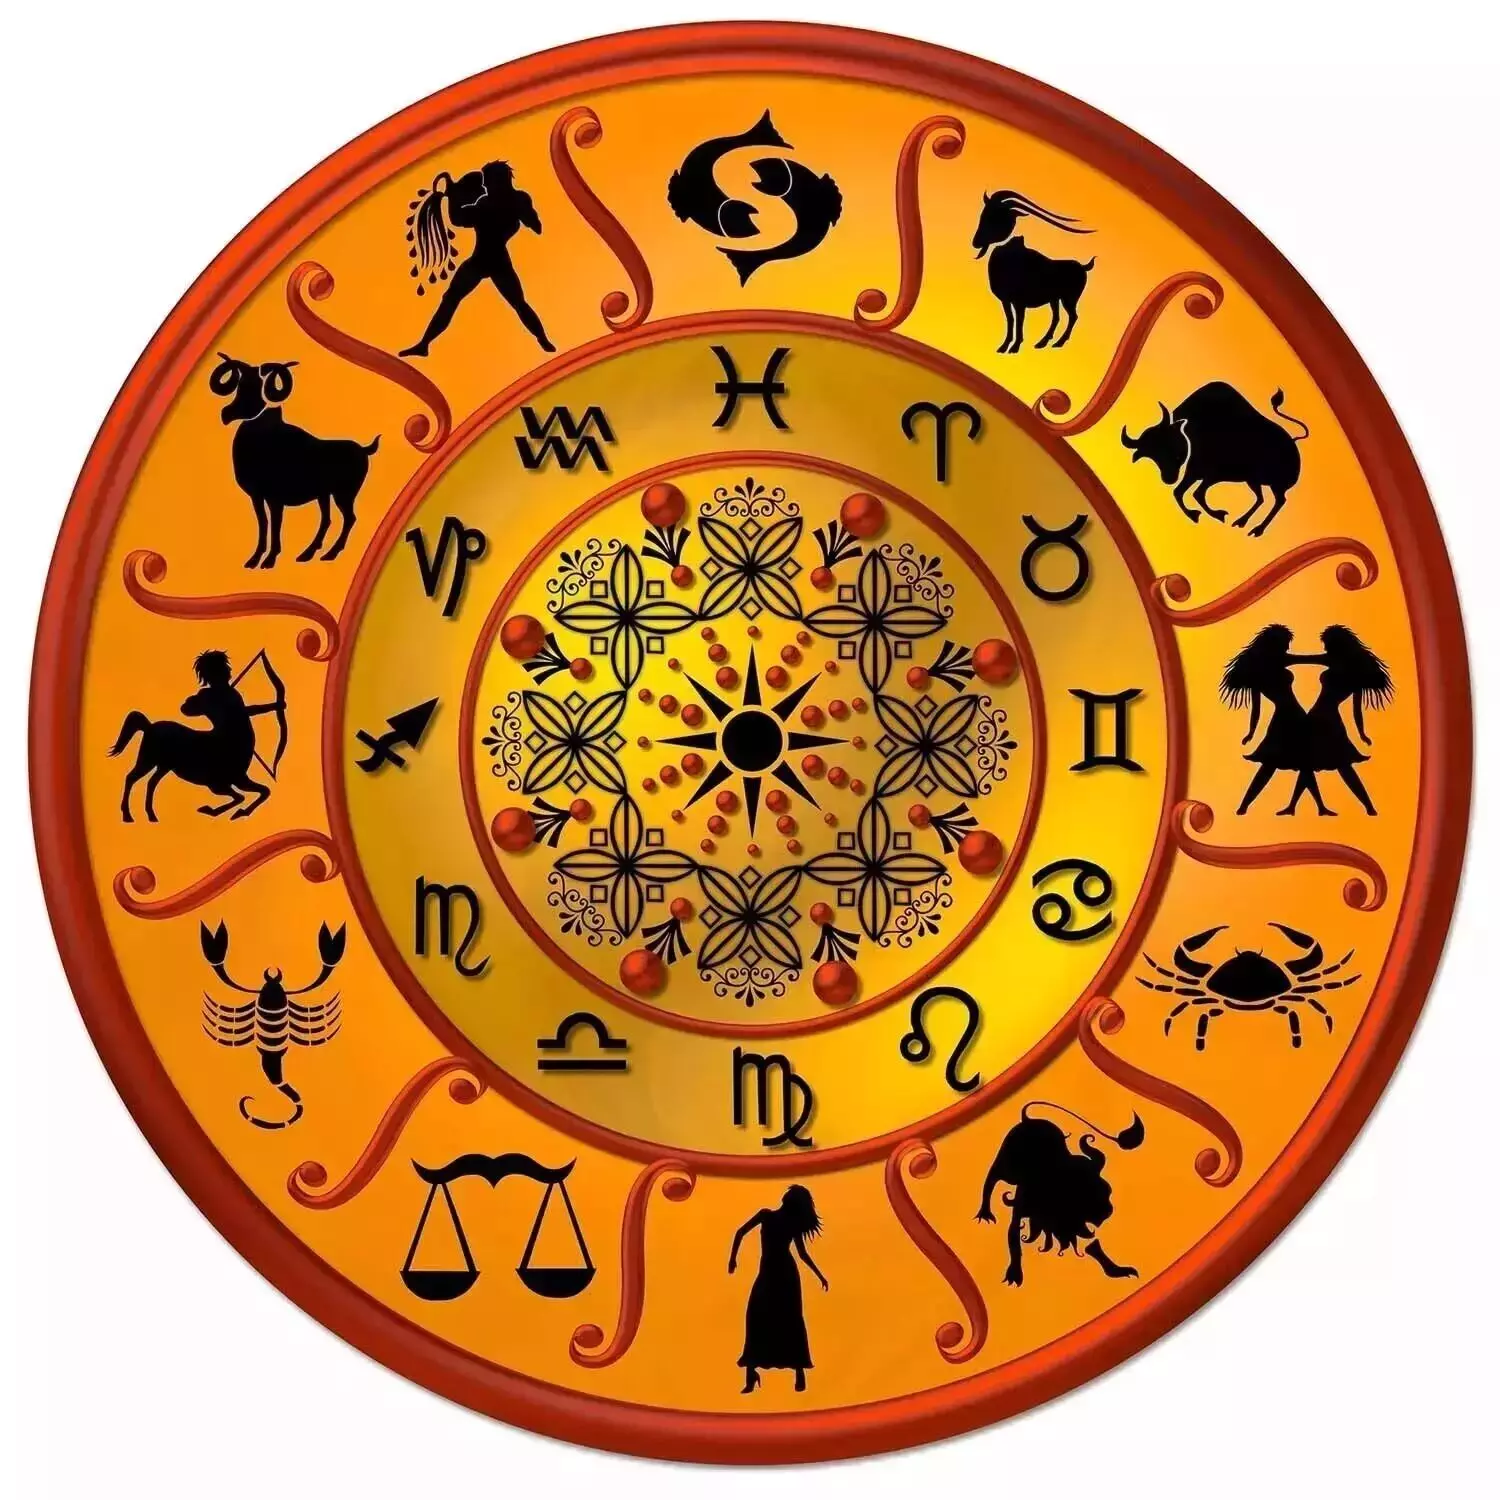 24 March  – Know your todays horoscope